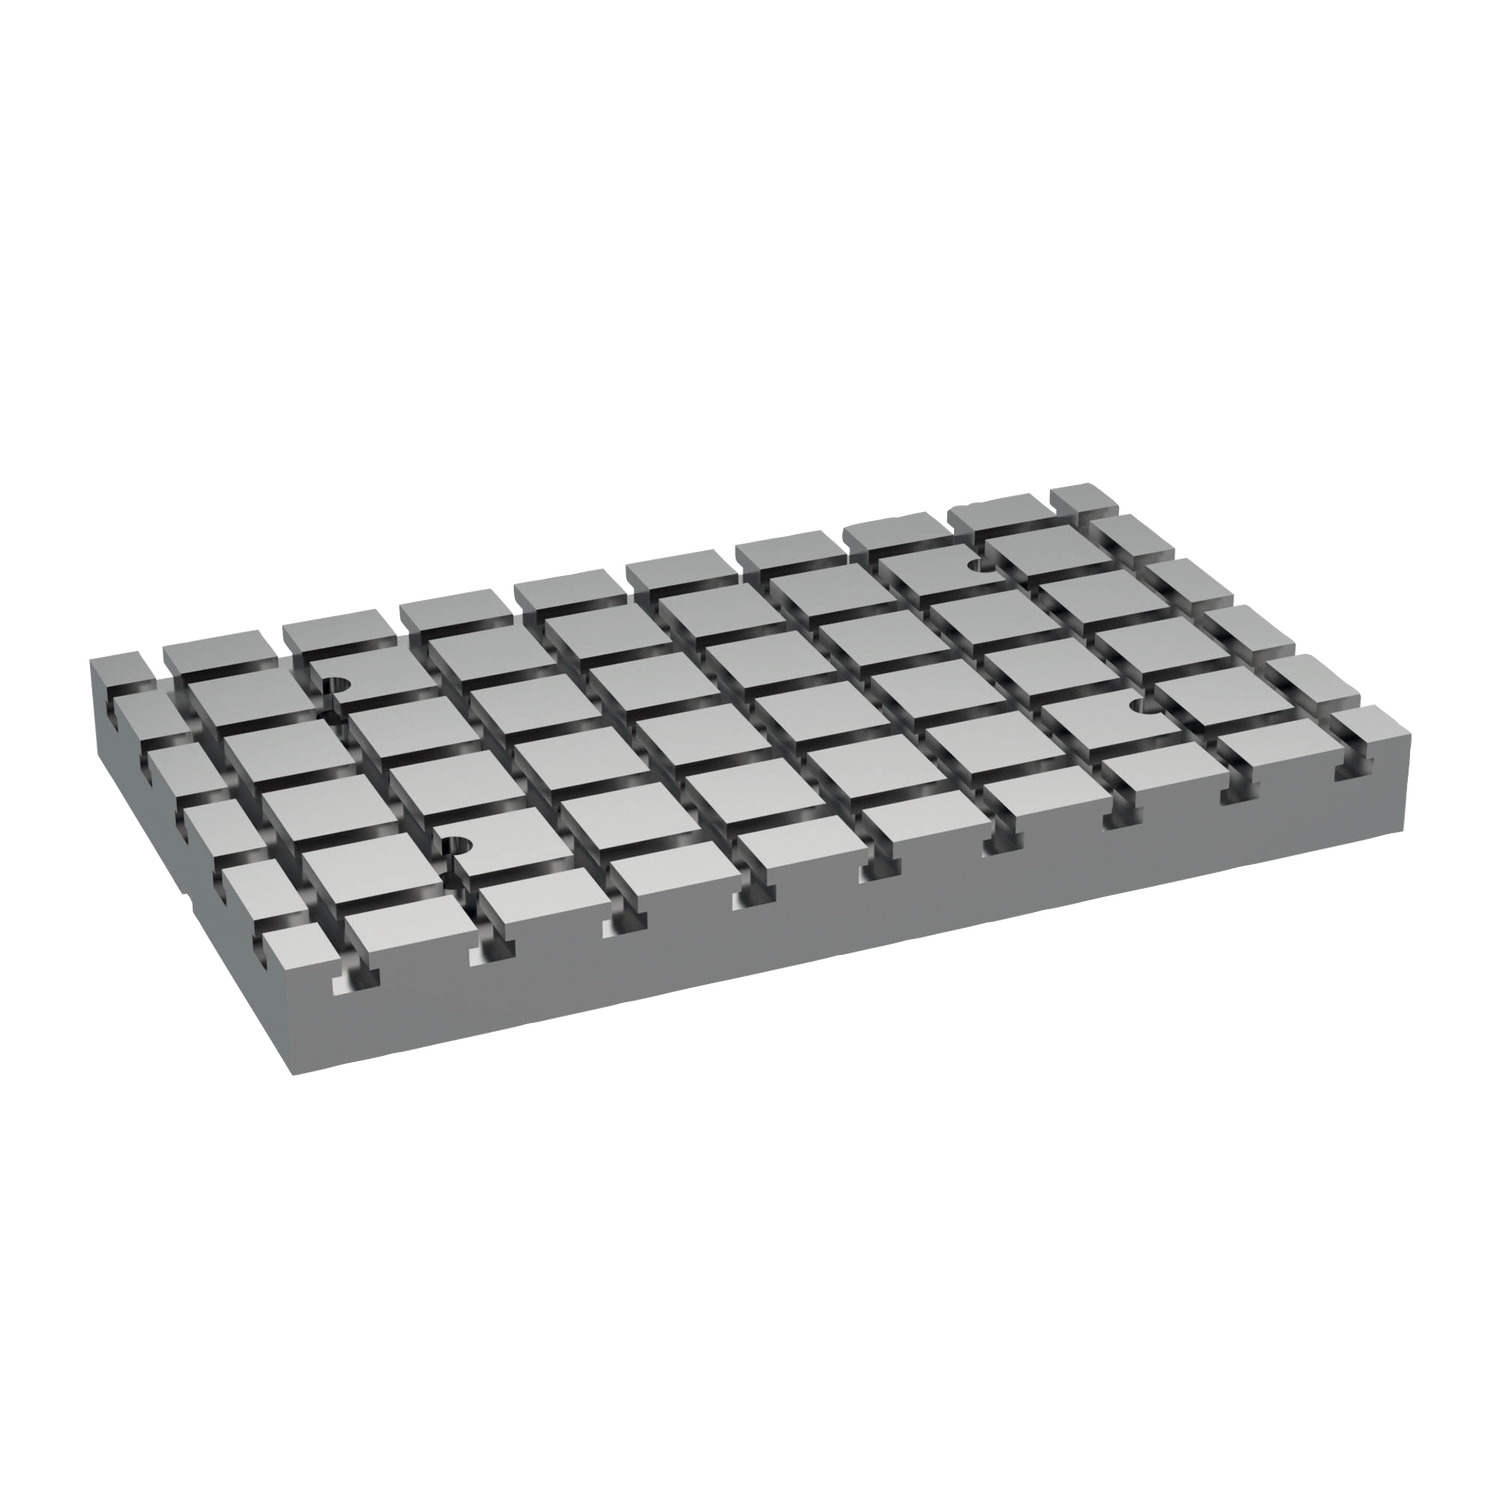 19580.W0400 Base plate -Tool steel. Price on application